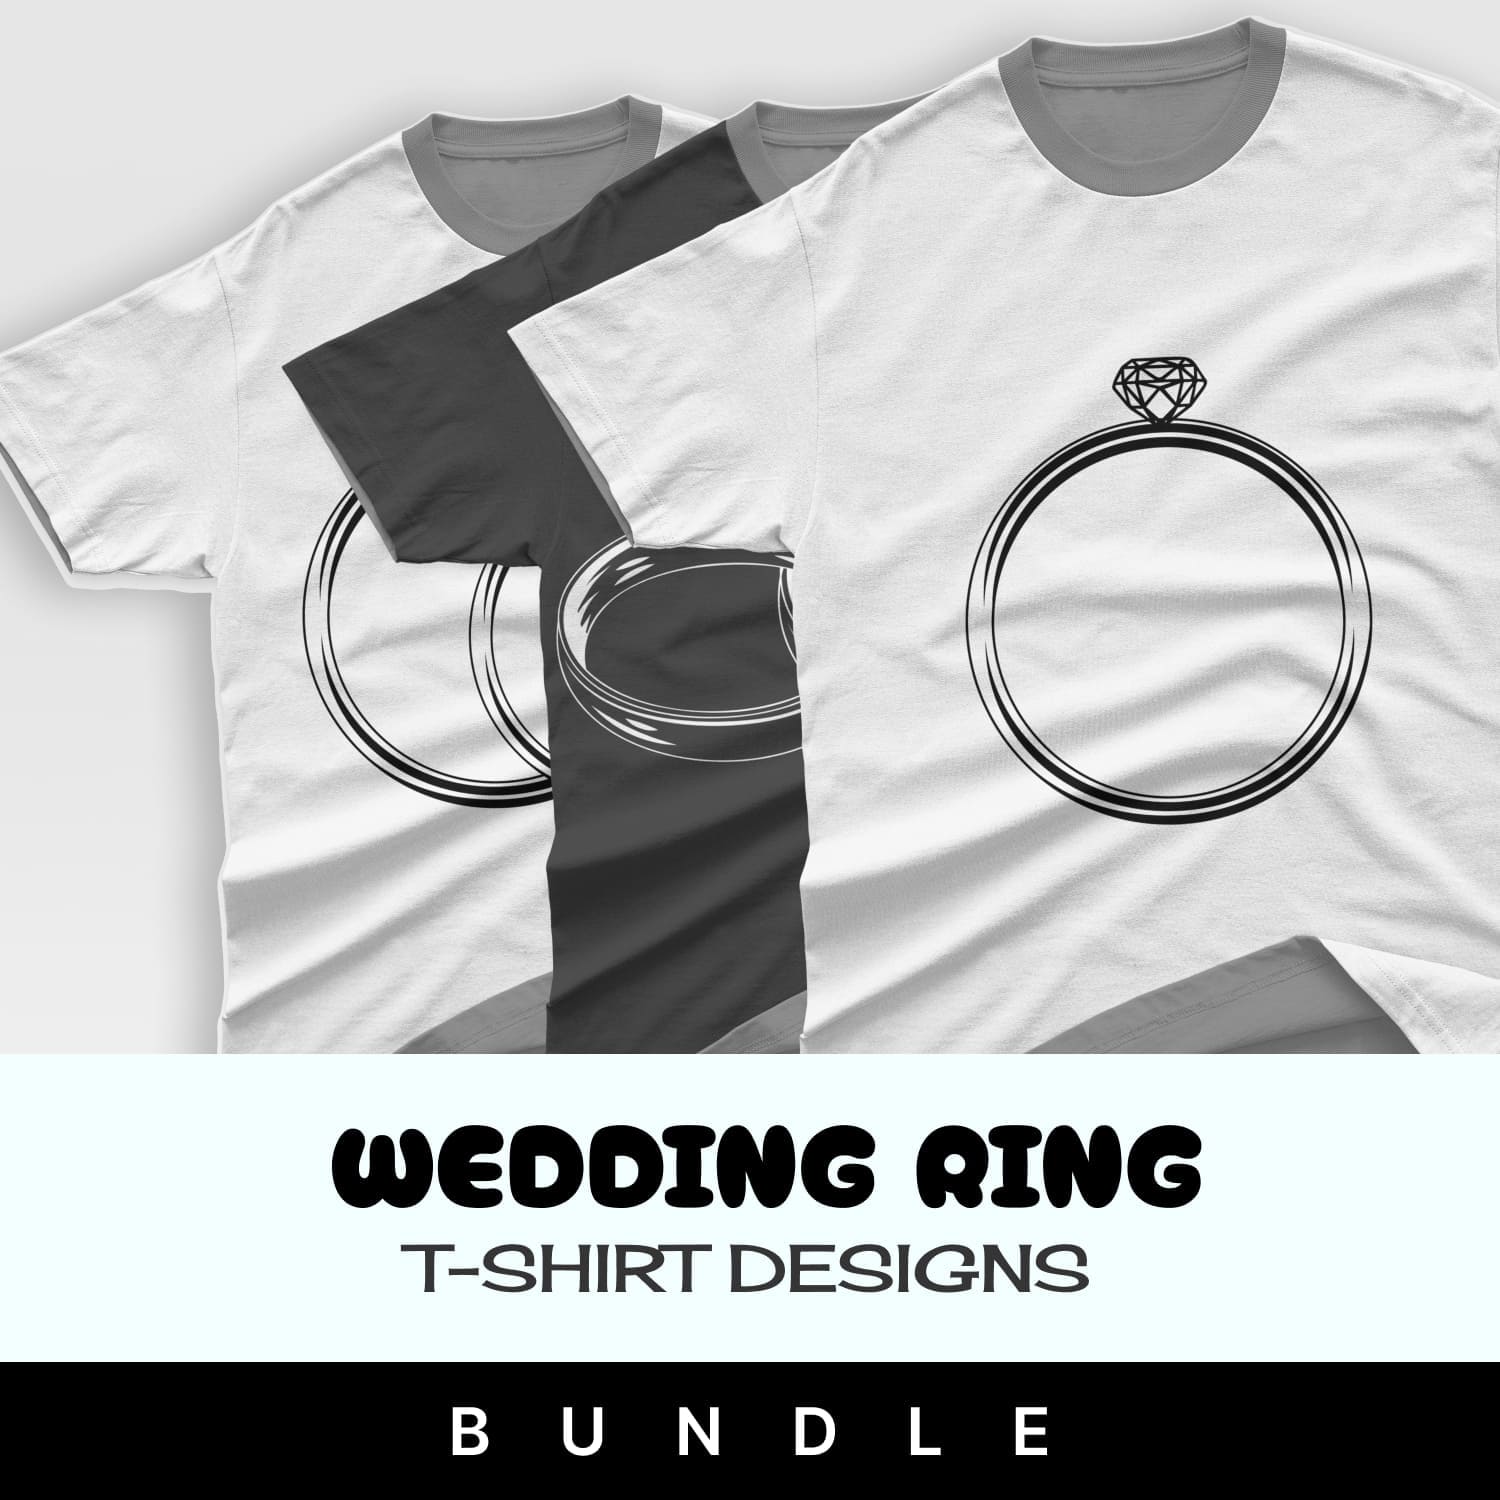 Dark and light t-shirts with wedding rings painted on them.